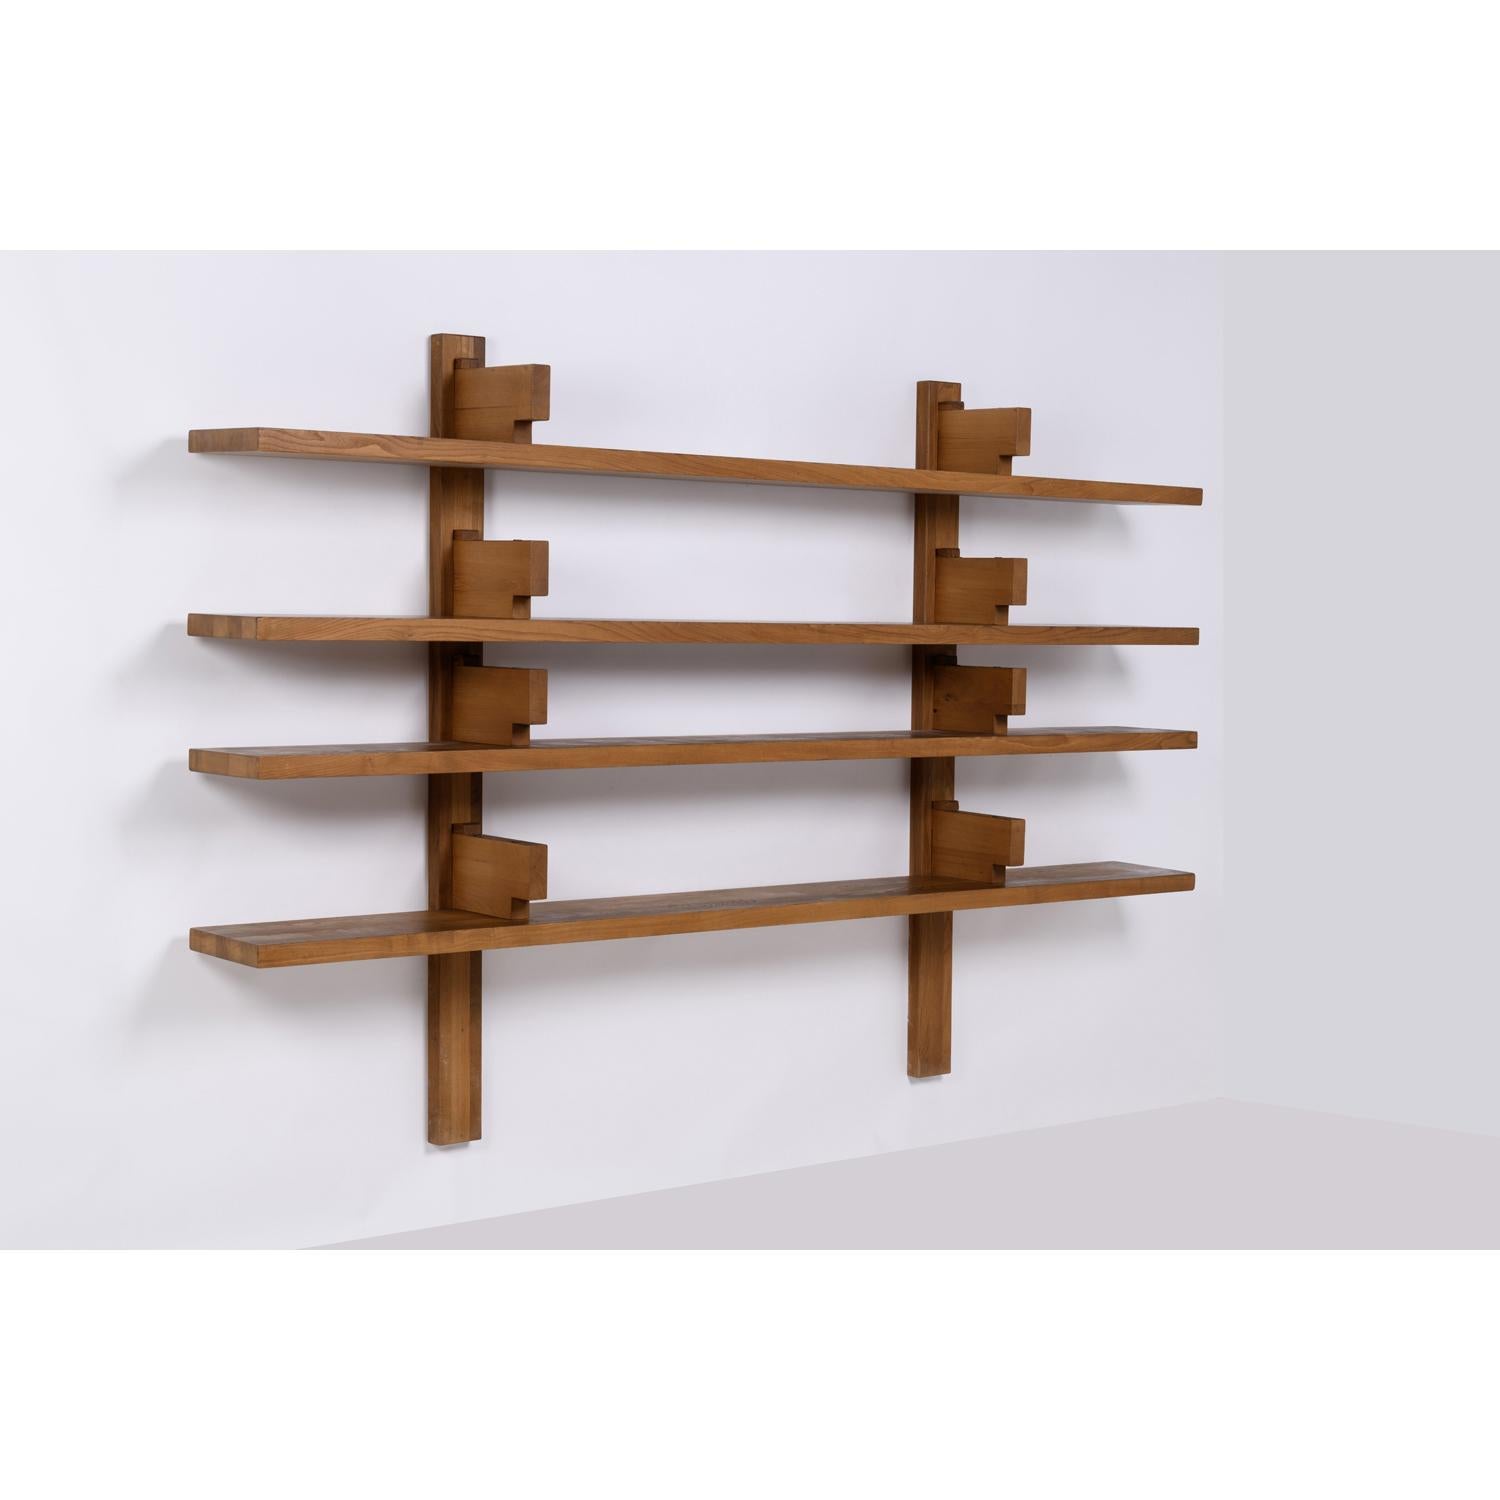 B17 Bibliothèque Wall Unit Shelve by Pierre Chapo in Elm Wood, France
This wall unit is available in three different sizes.
B17C : length 284 cm, height 183 cm, tiefe 35 cm, weight 152 kg price add of 30%.